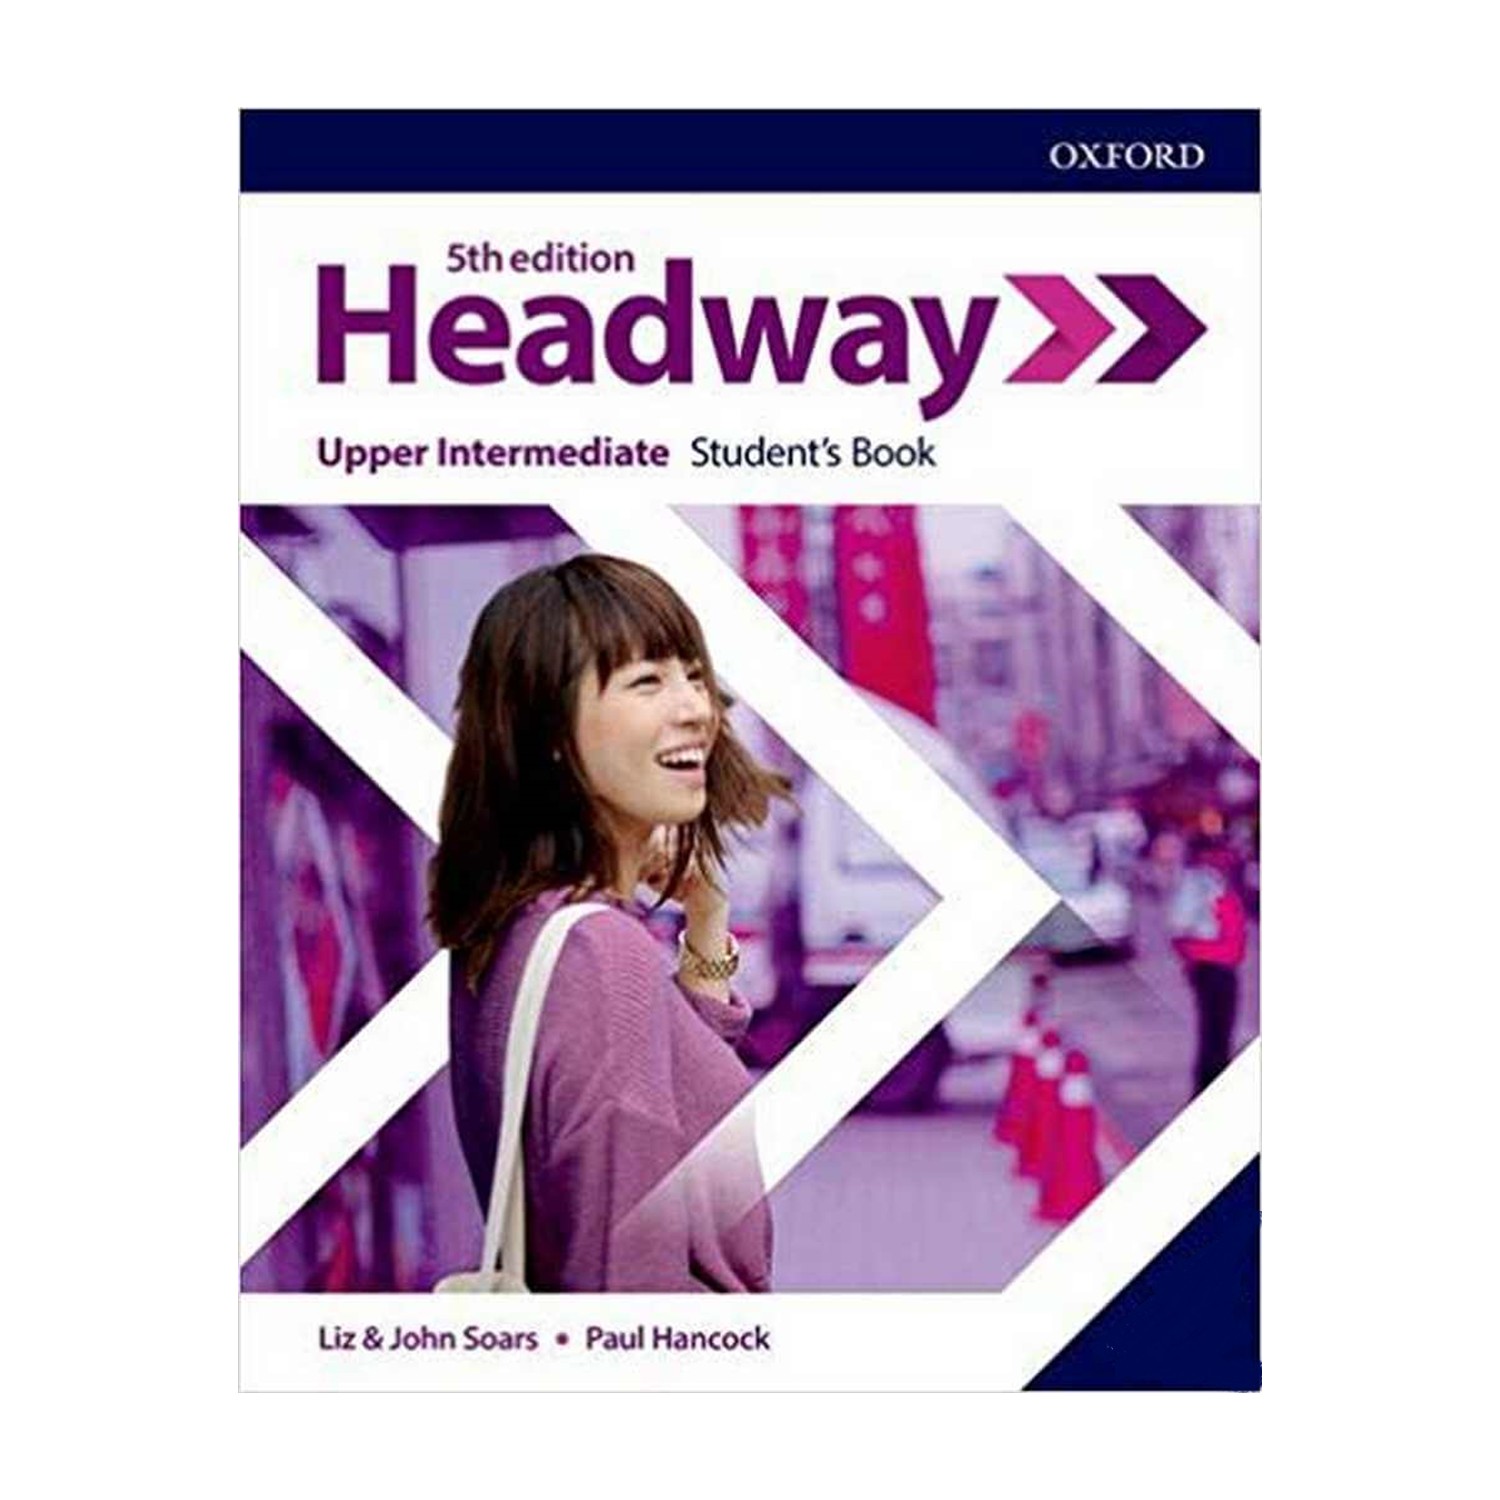 New headway 5th edition. New Headway Upper Intermediate 5th Edition. Headway, 5th Edition - 2019. Headway 4 Edition Upper-Intermediate. Headway pre Intermediate Workbook 5th.